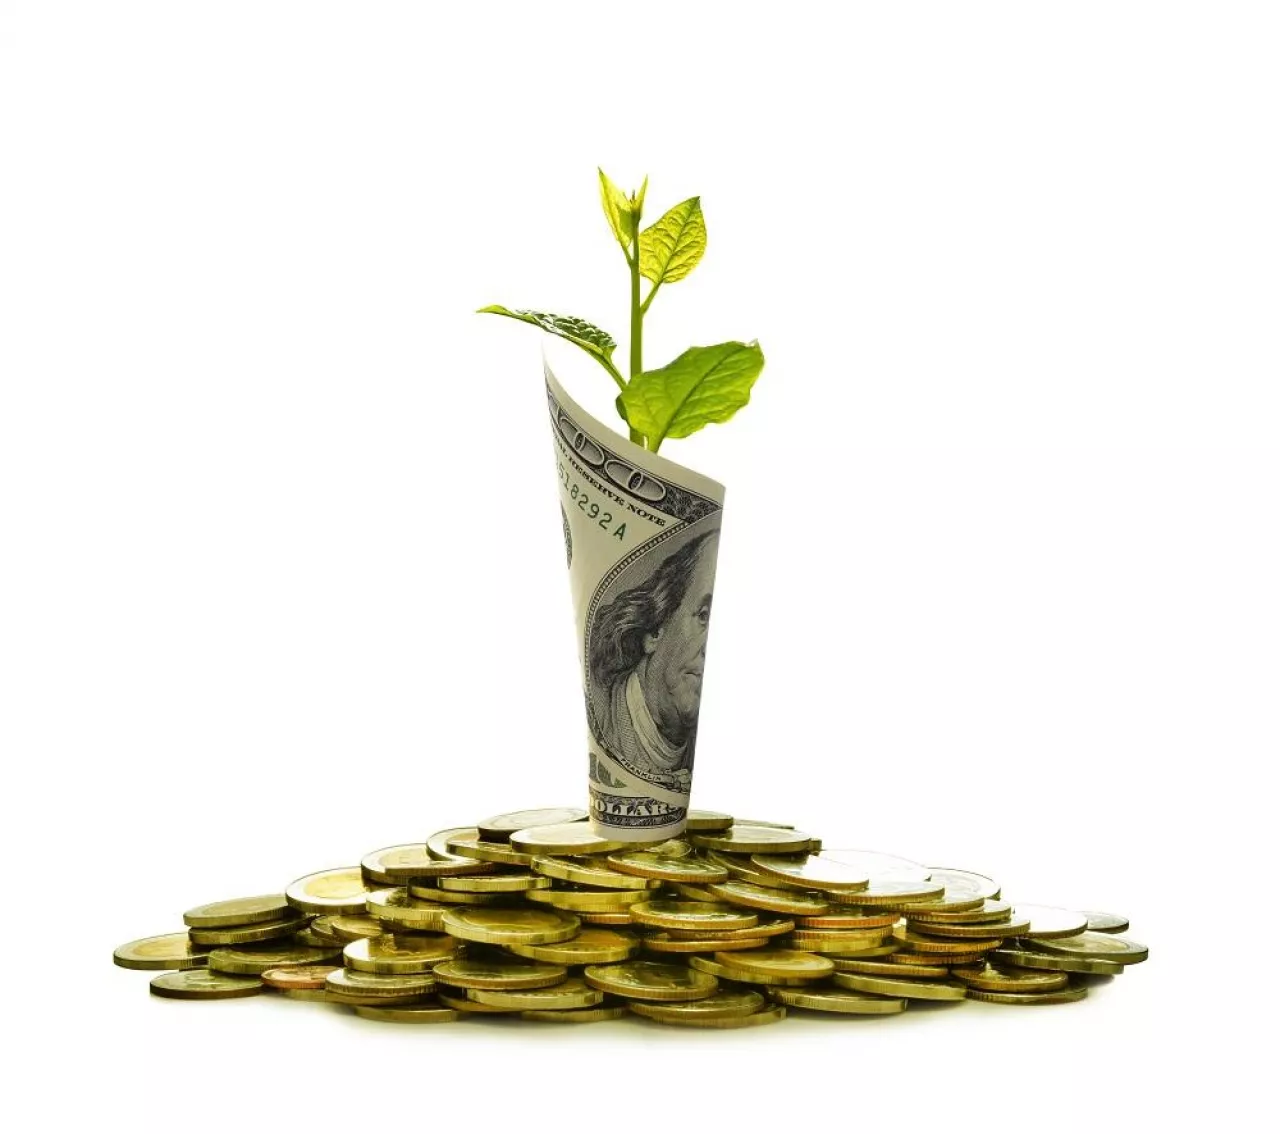 Image of pile of coins and rolled bank note with plant on top showing business, saving, growth, economic concept isolated on white background